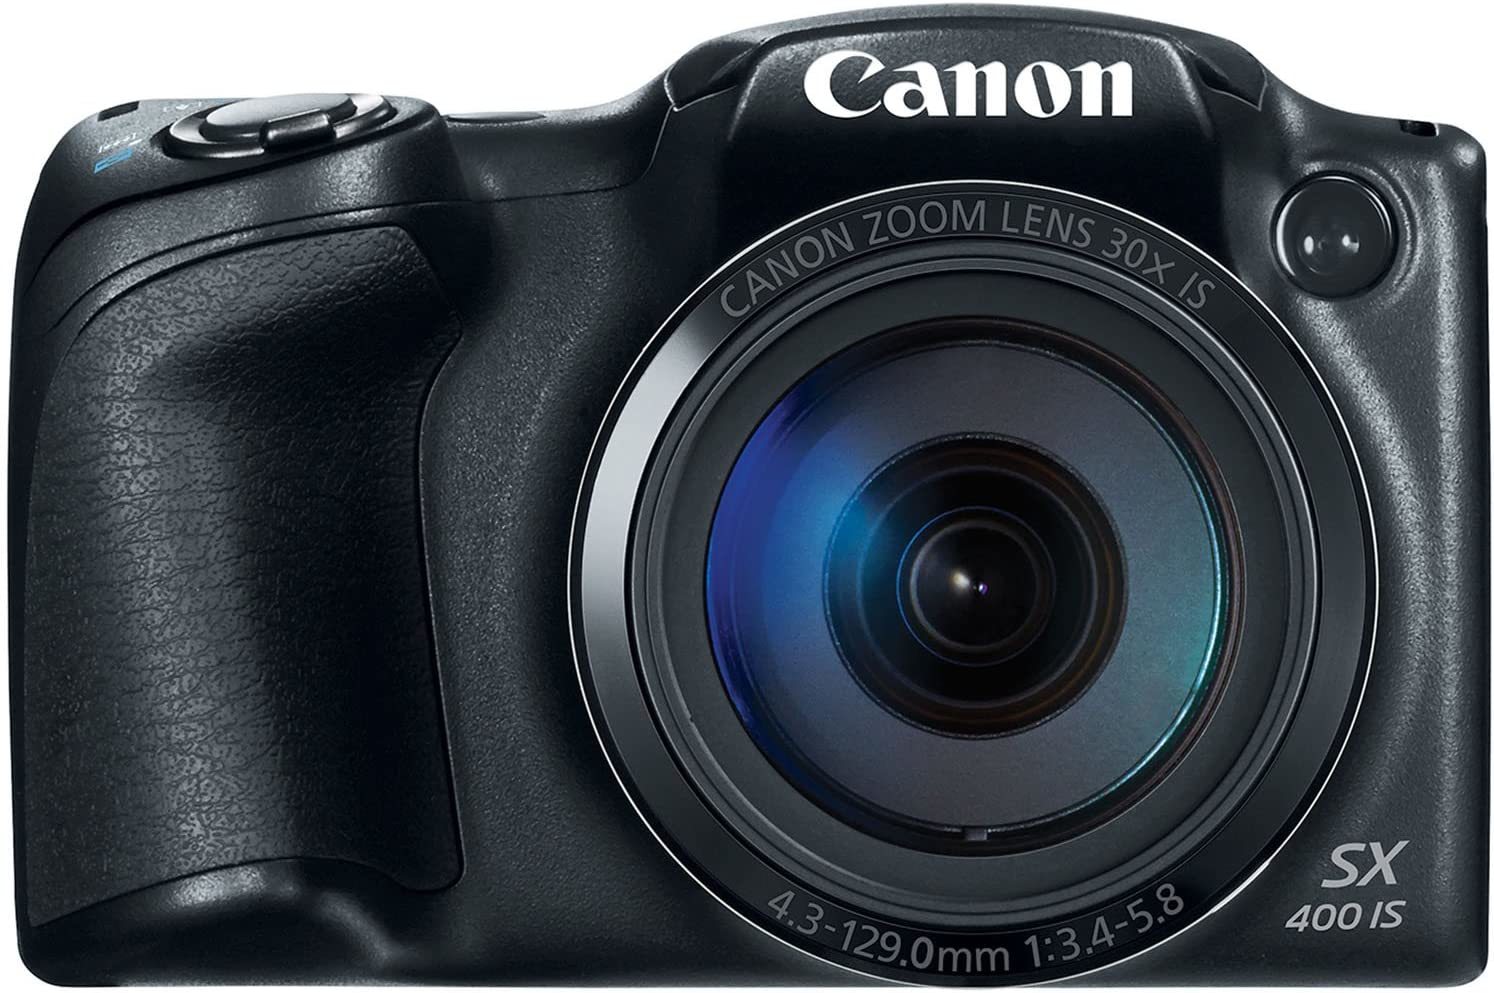 Canon Powershot Sx400 Digital Camera With 30X Optical Zoom (Black) (Manufacturer - $217.97